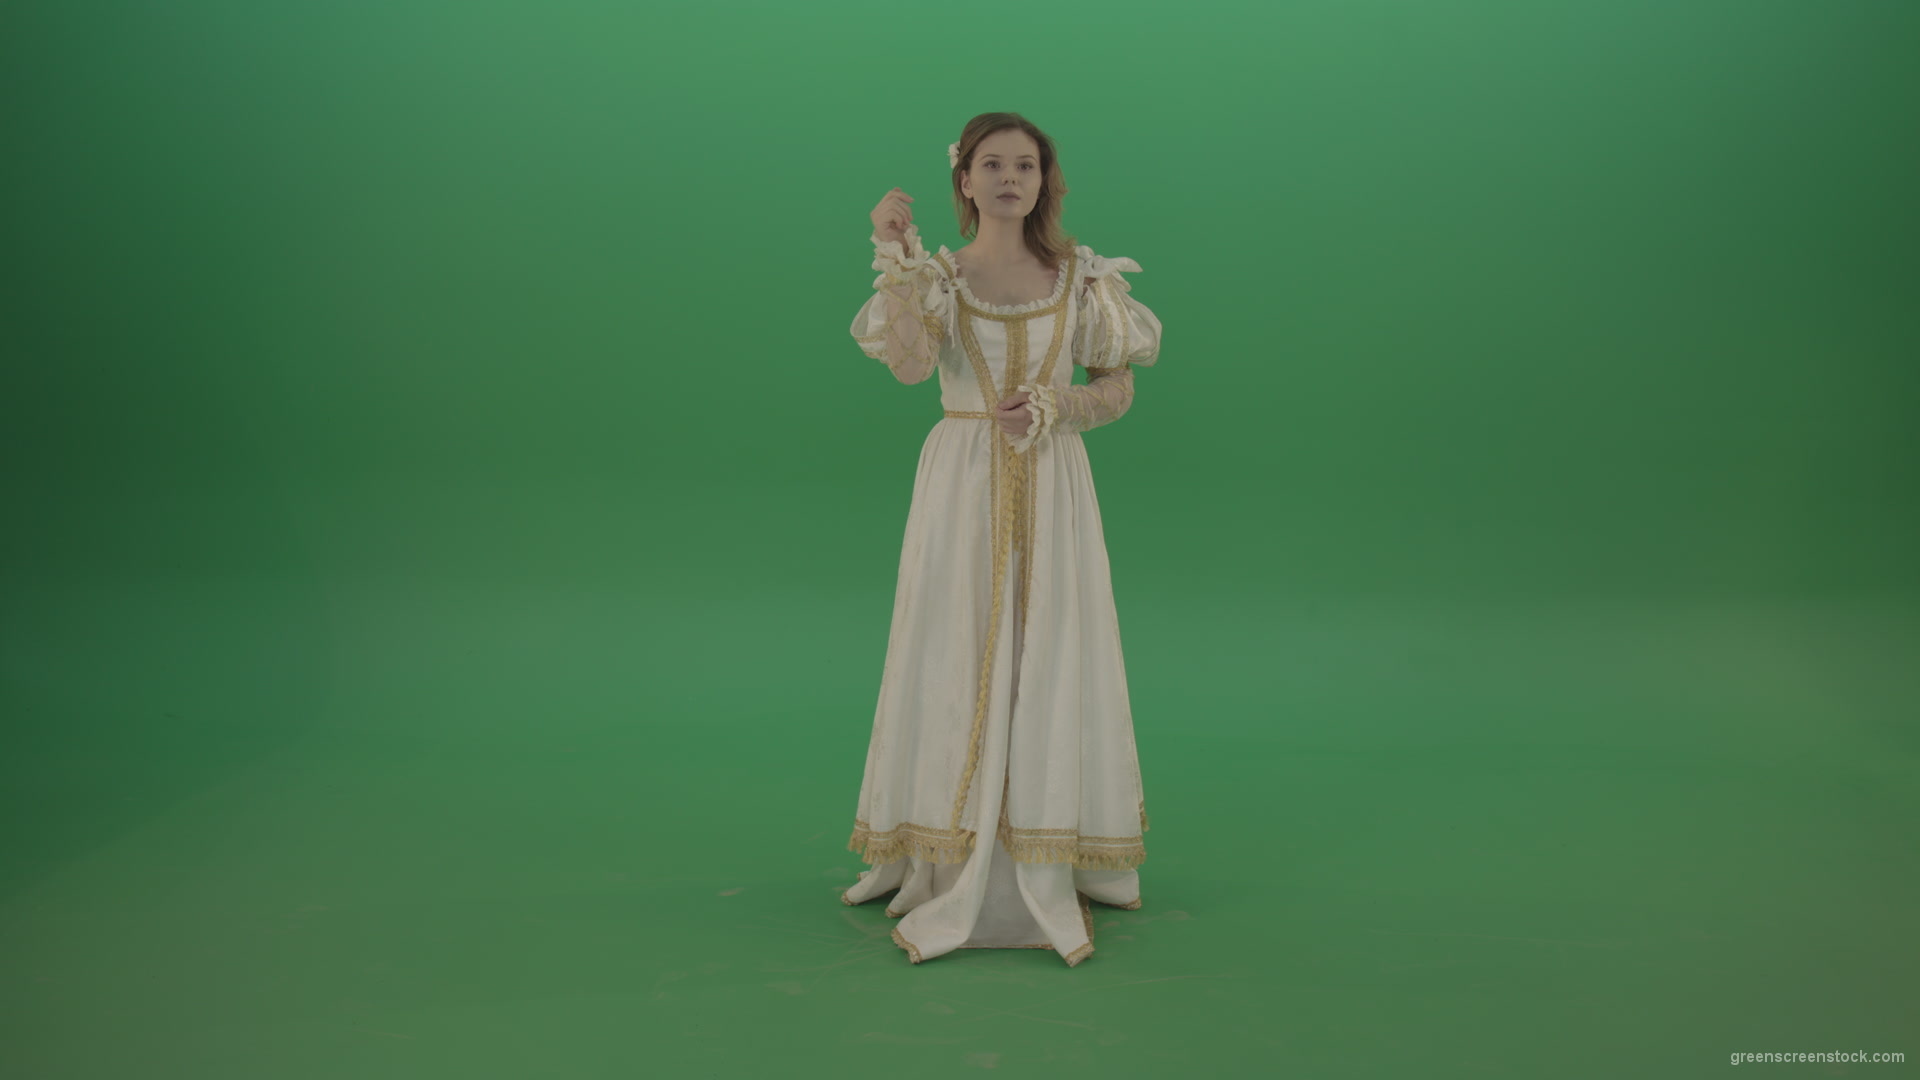 Girl-is-full-grown-dressed-beautifully-screaming-the-news-leader-isolated-on-green-background_006 Green Screen Stock